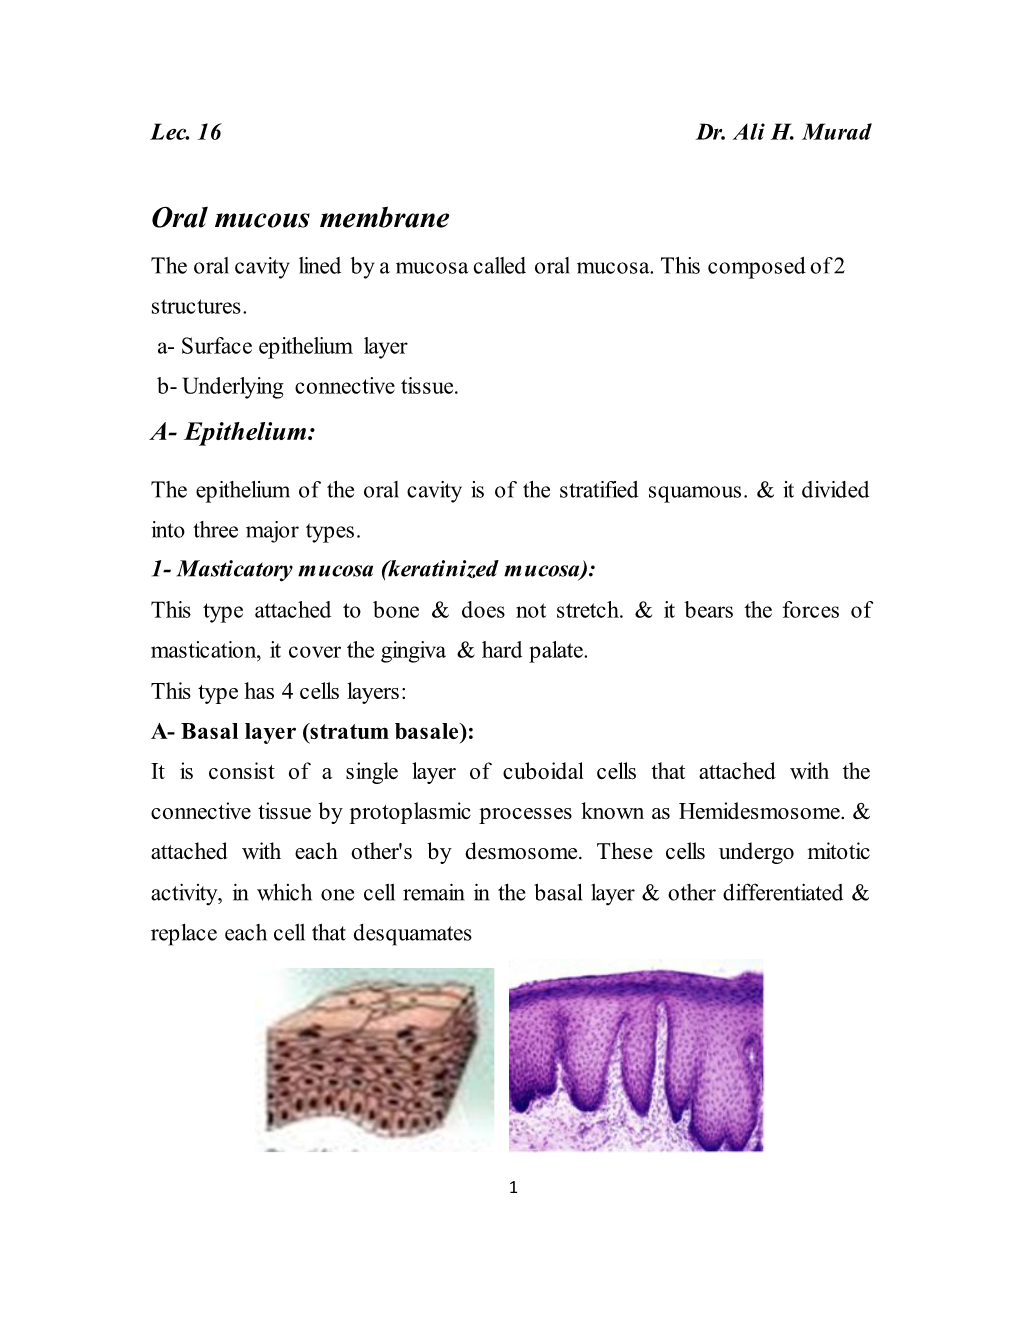 Oral Mucous Membrane the Oral Cavity Lined by a Mucosa Called Oral Mucosa